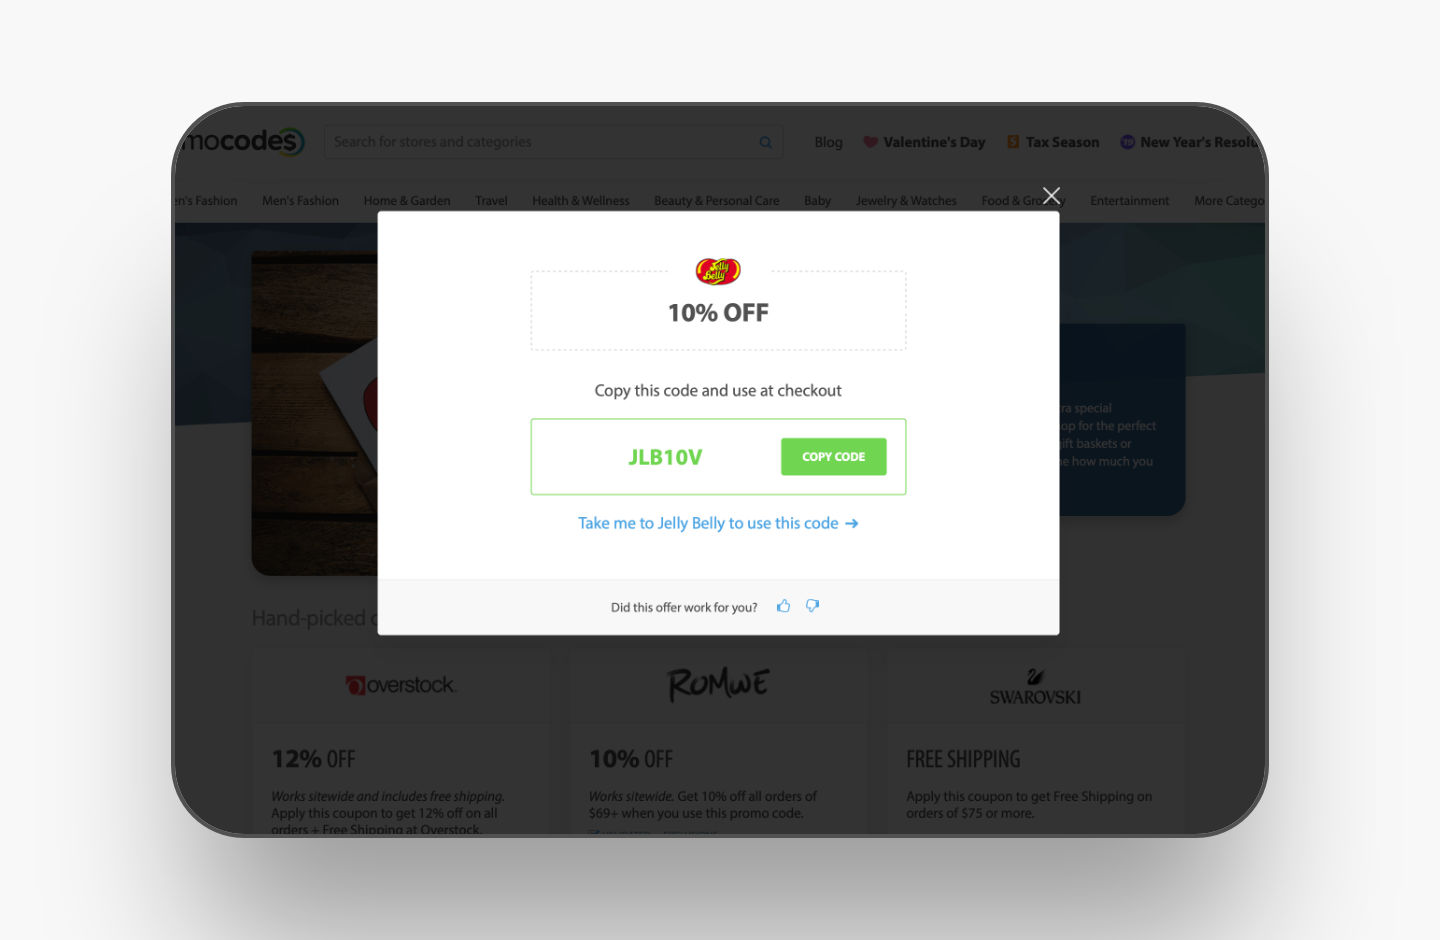 modal design for accessing a promo code and its copy function